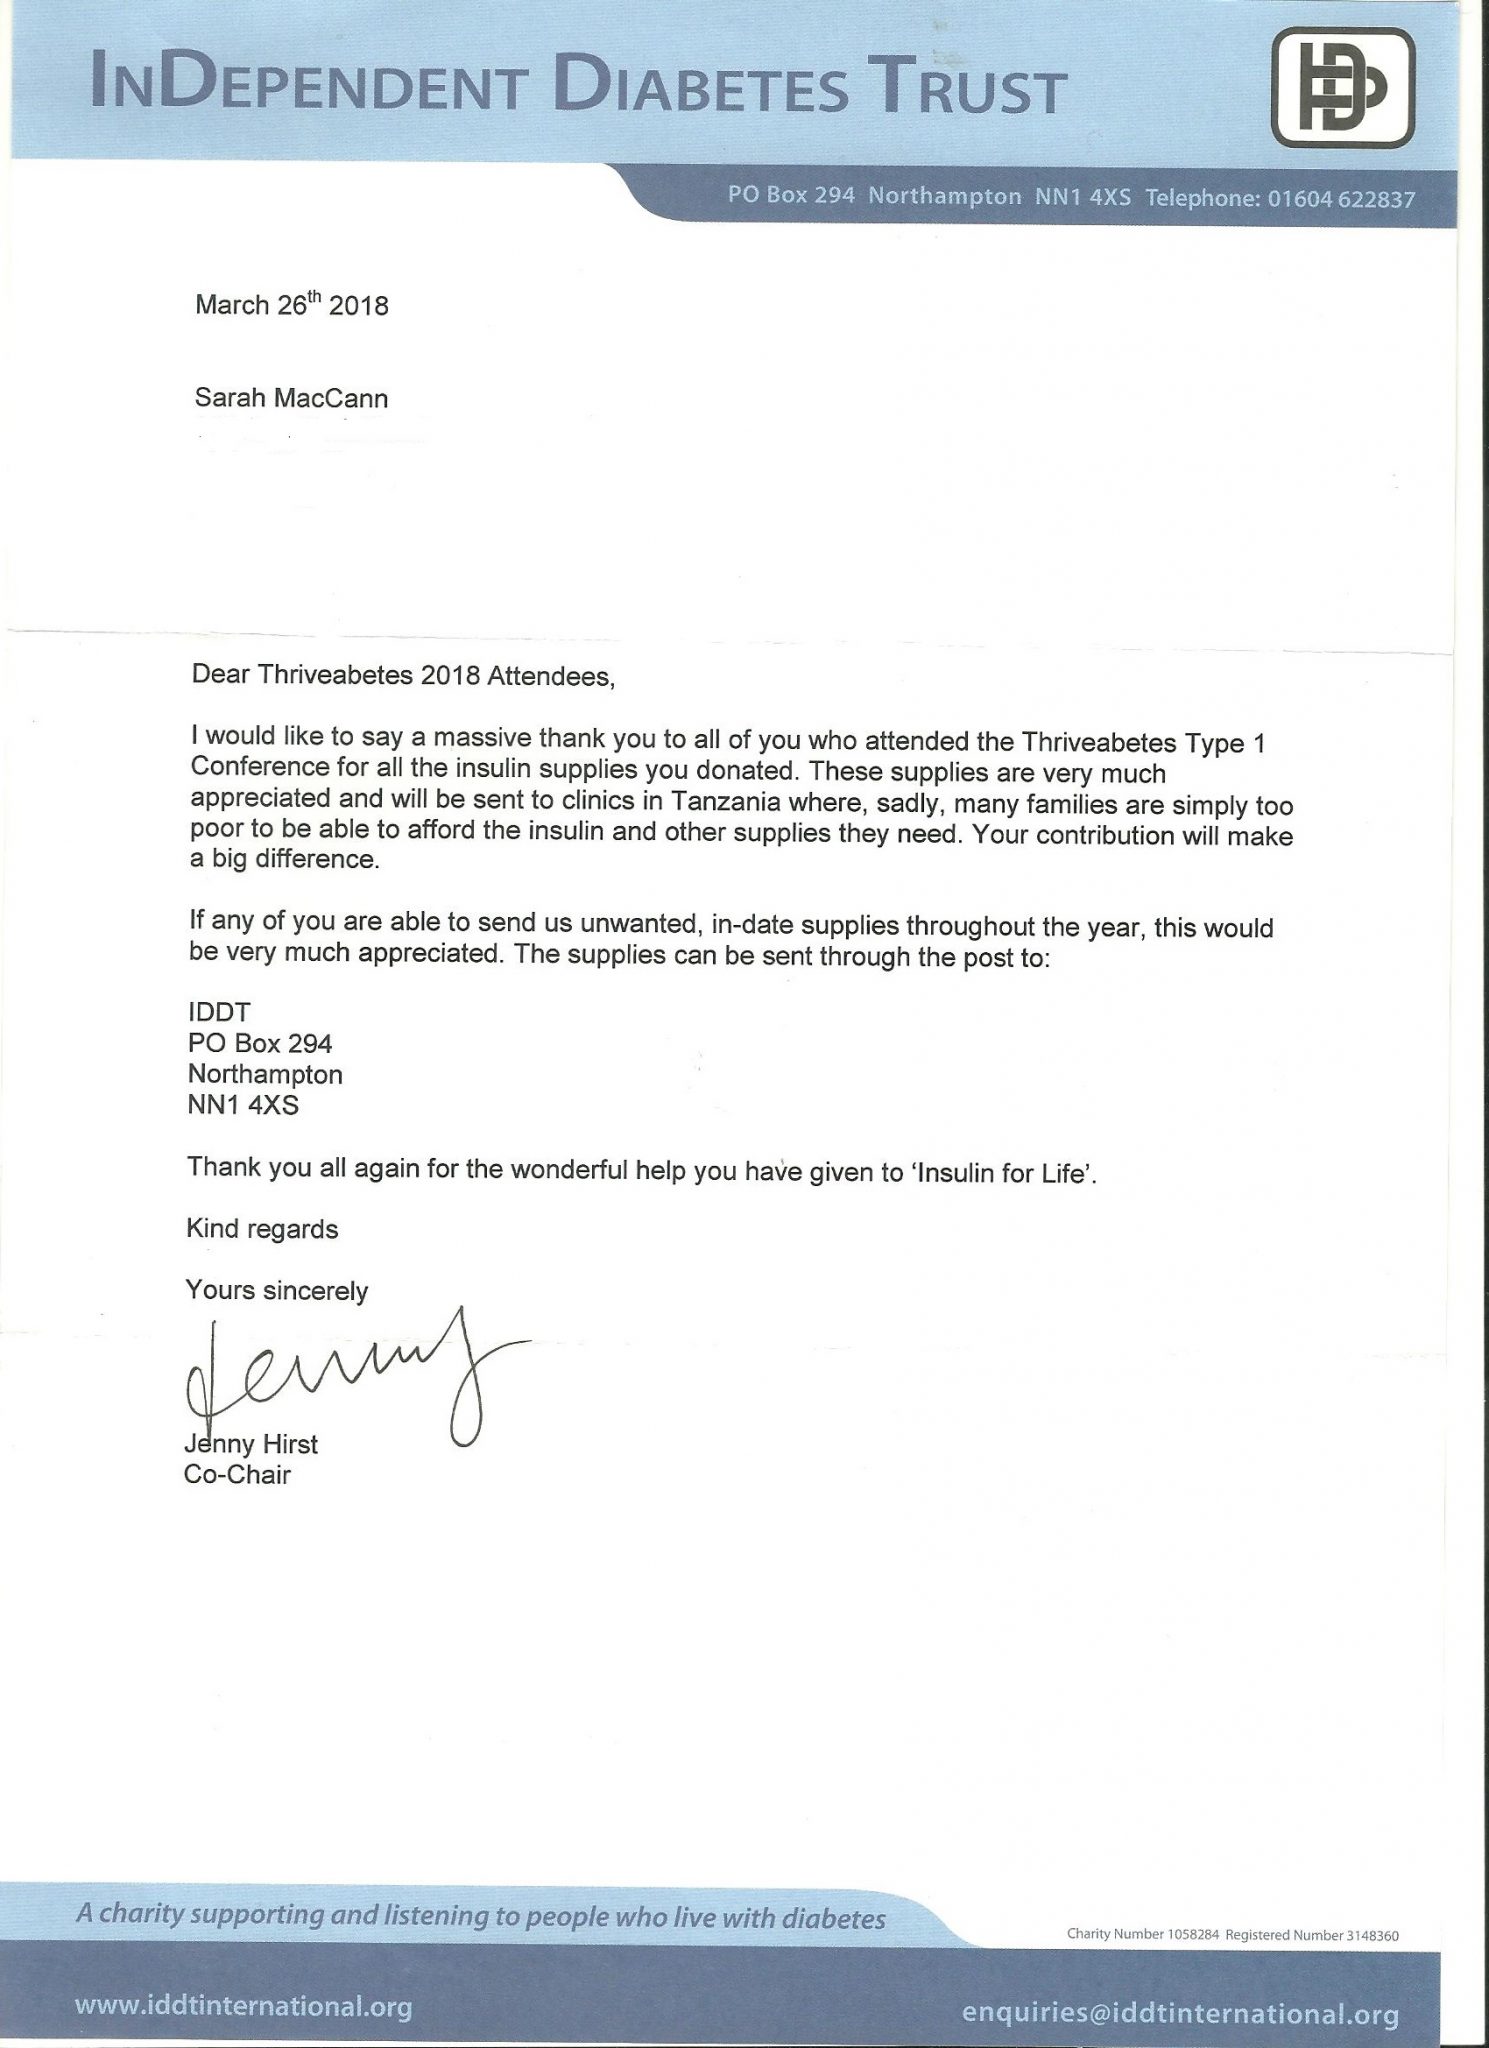 Thank you letter from the InDependent Diabetes Trust